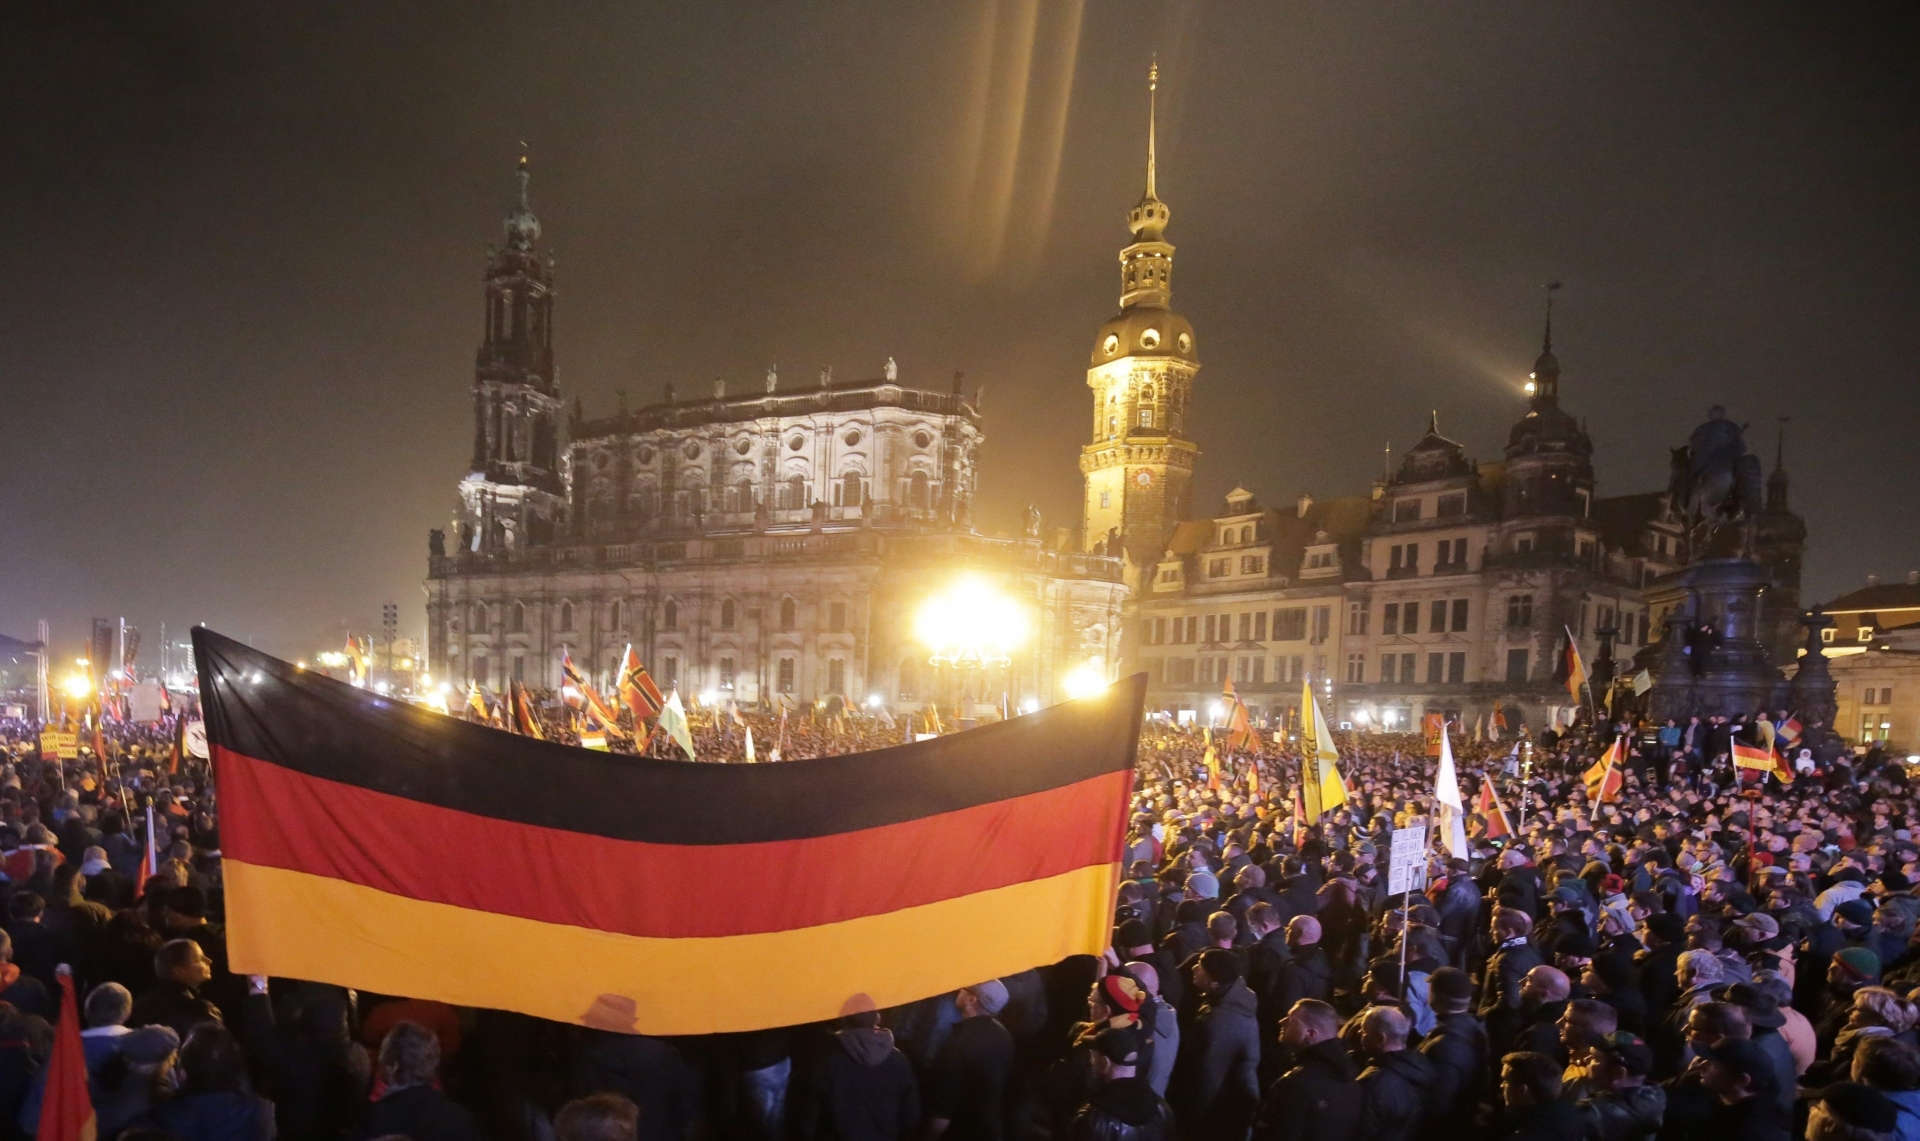 epa04984324 Pegida demonstrators in Dresden, Germany, 19 October 2015. One year ago, Pegida (Patriotic Europeans against the Islamification of the West), took to the streets for the first time.  EPA/MICHAEL KAPPELER GERMANY PEGIDA